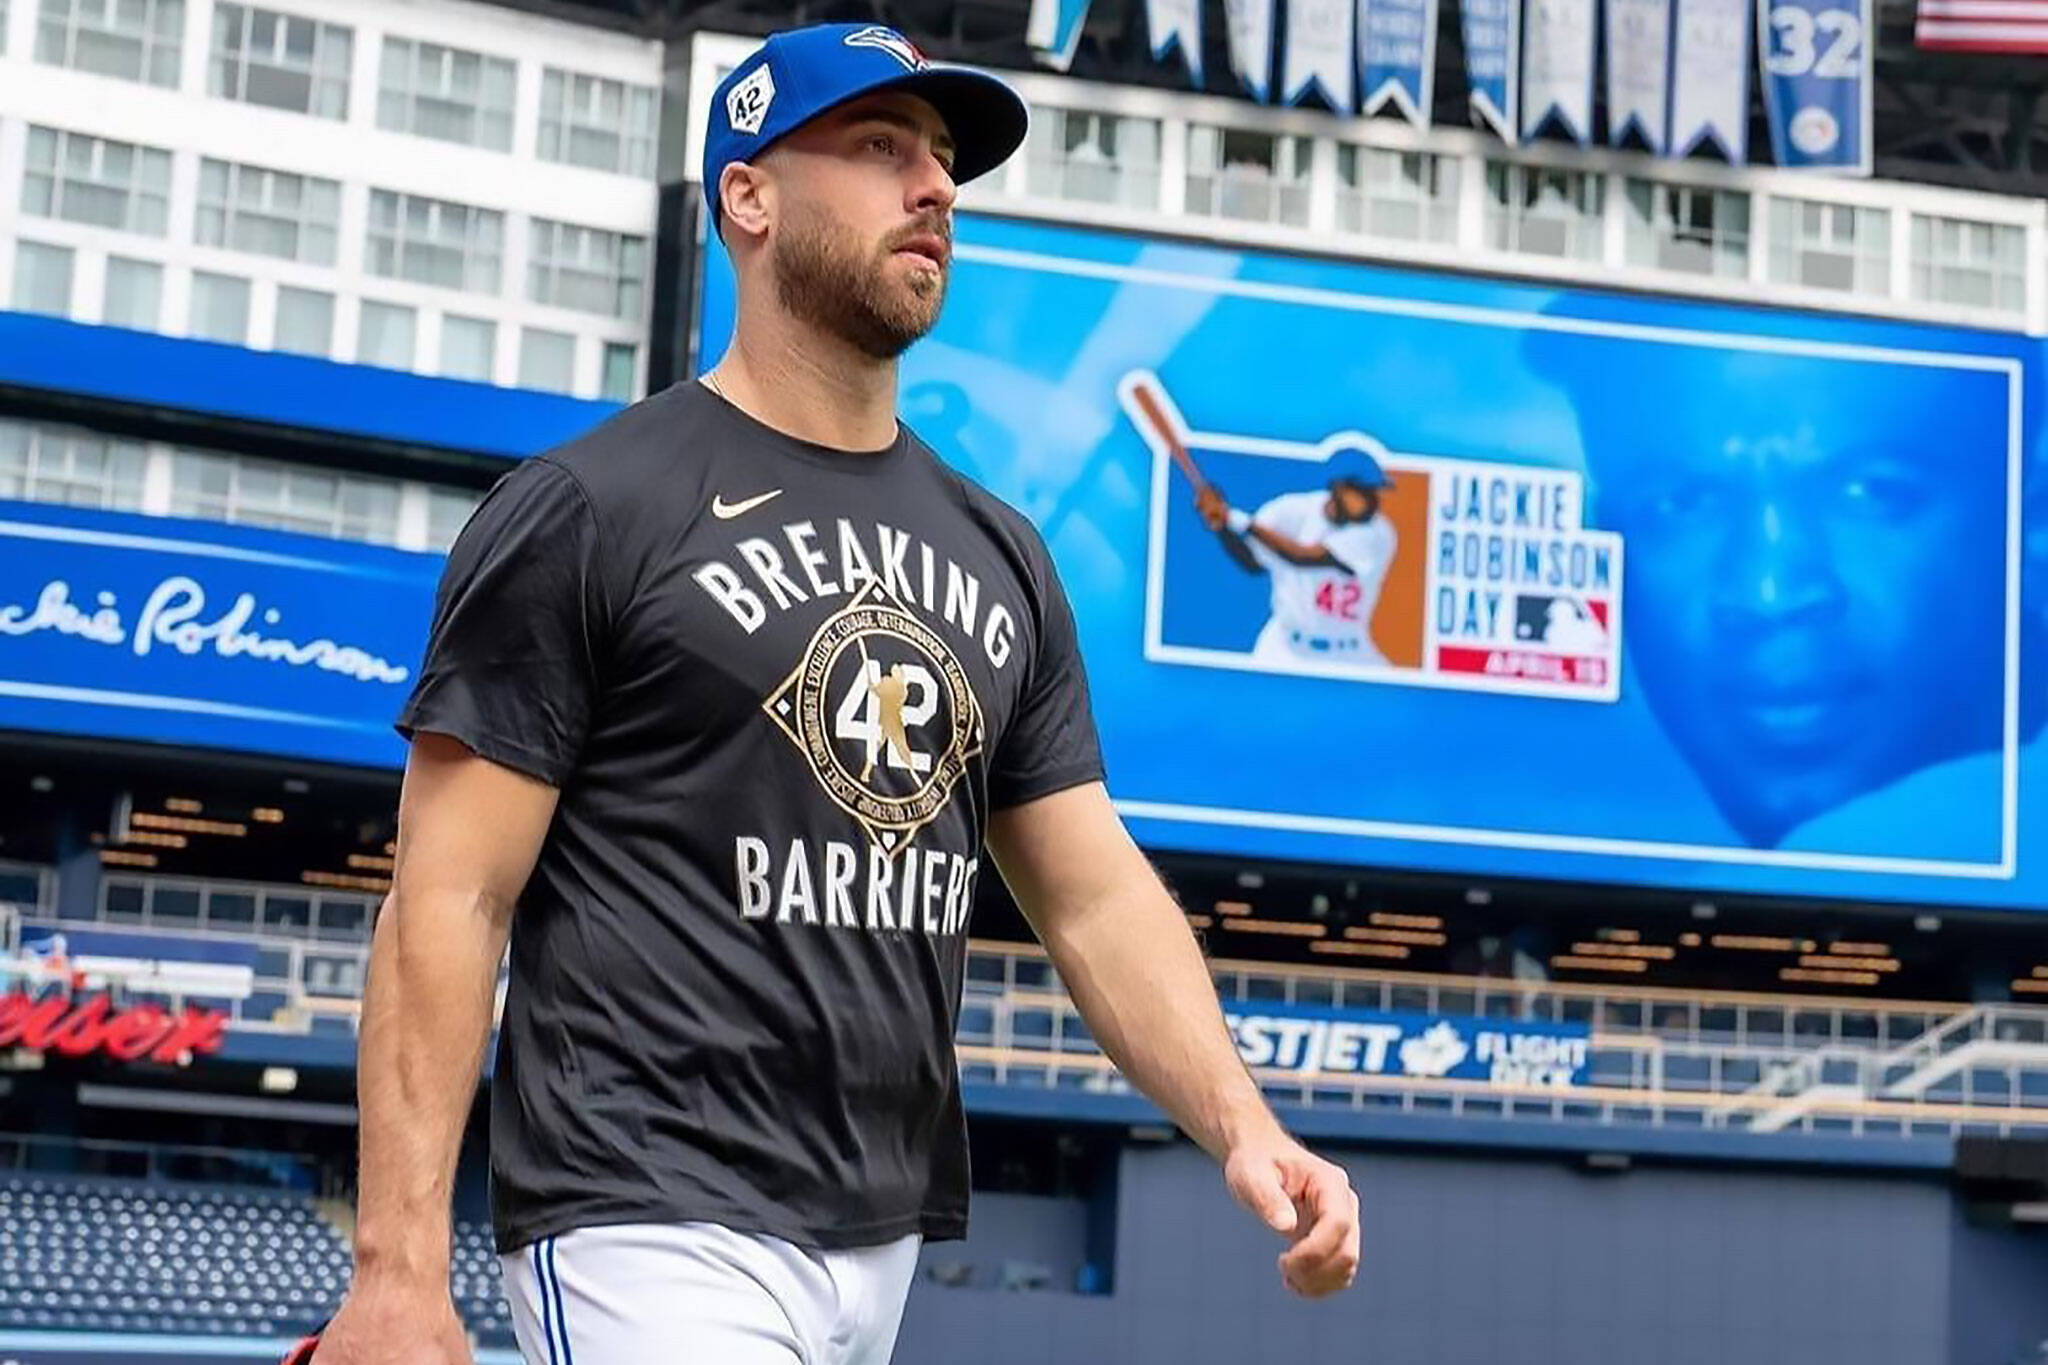 Controversial Toronto Blue Jays player is promoting anti-LGBTQ